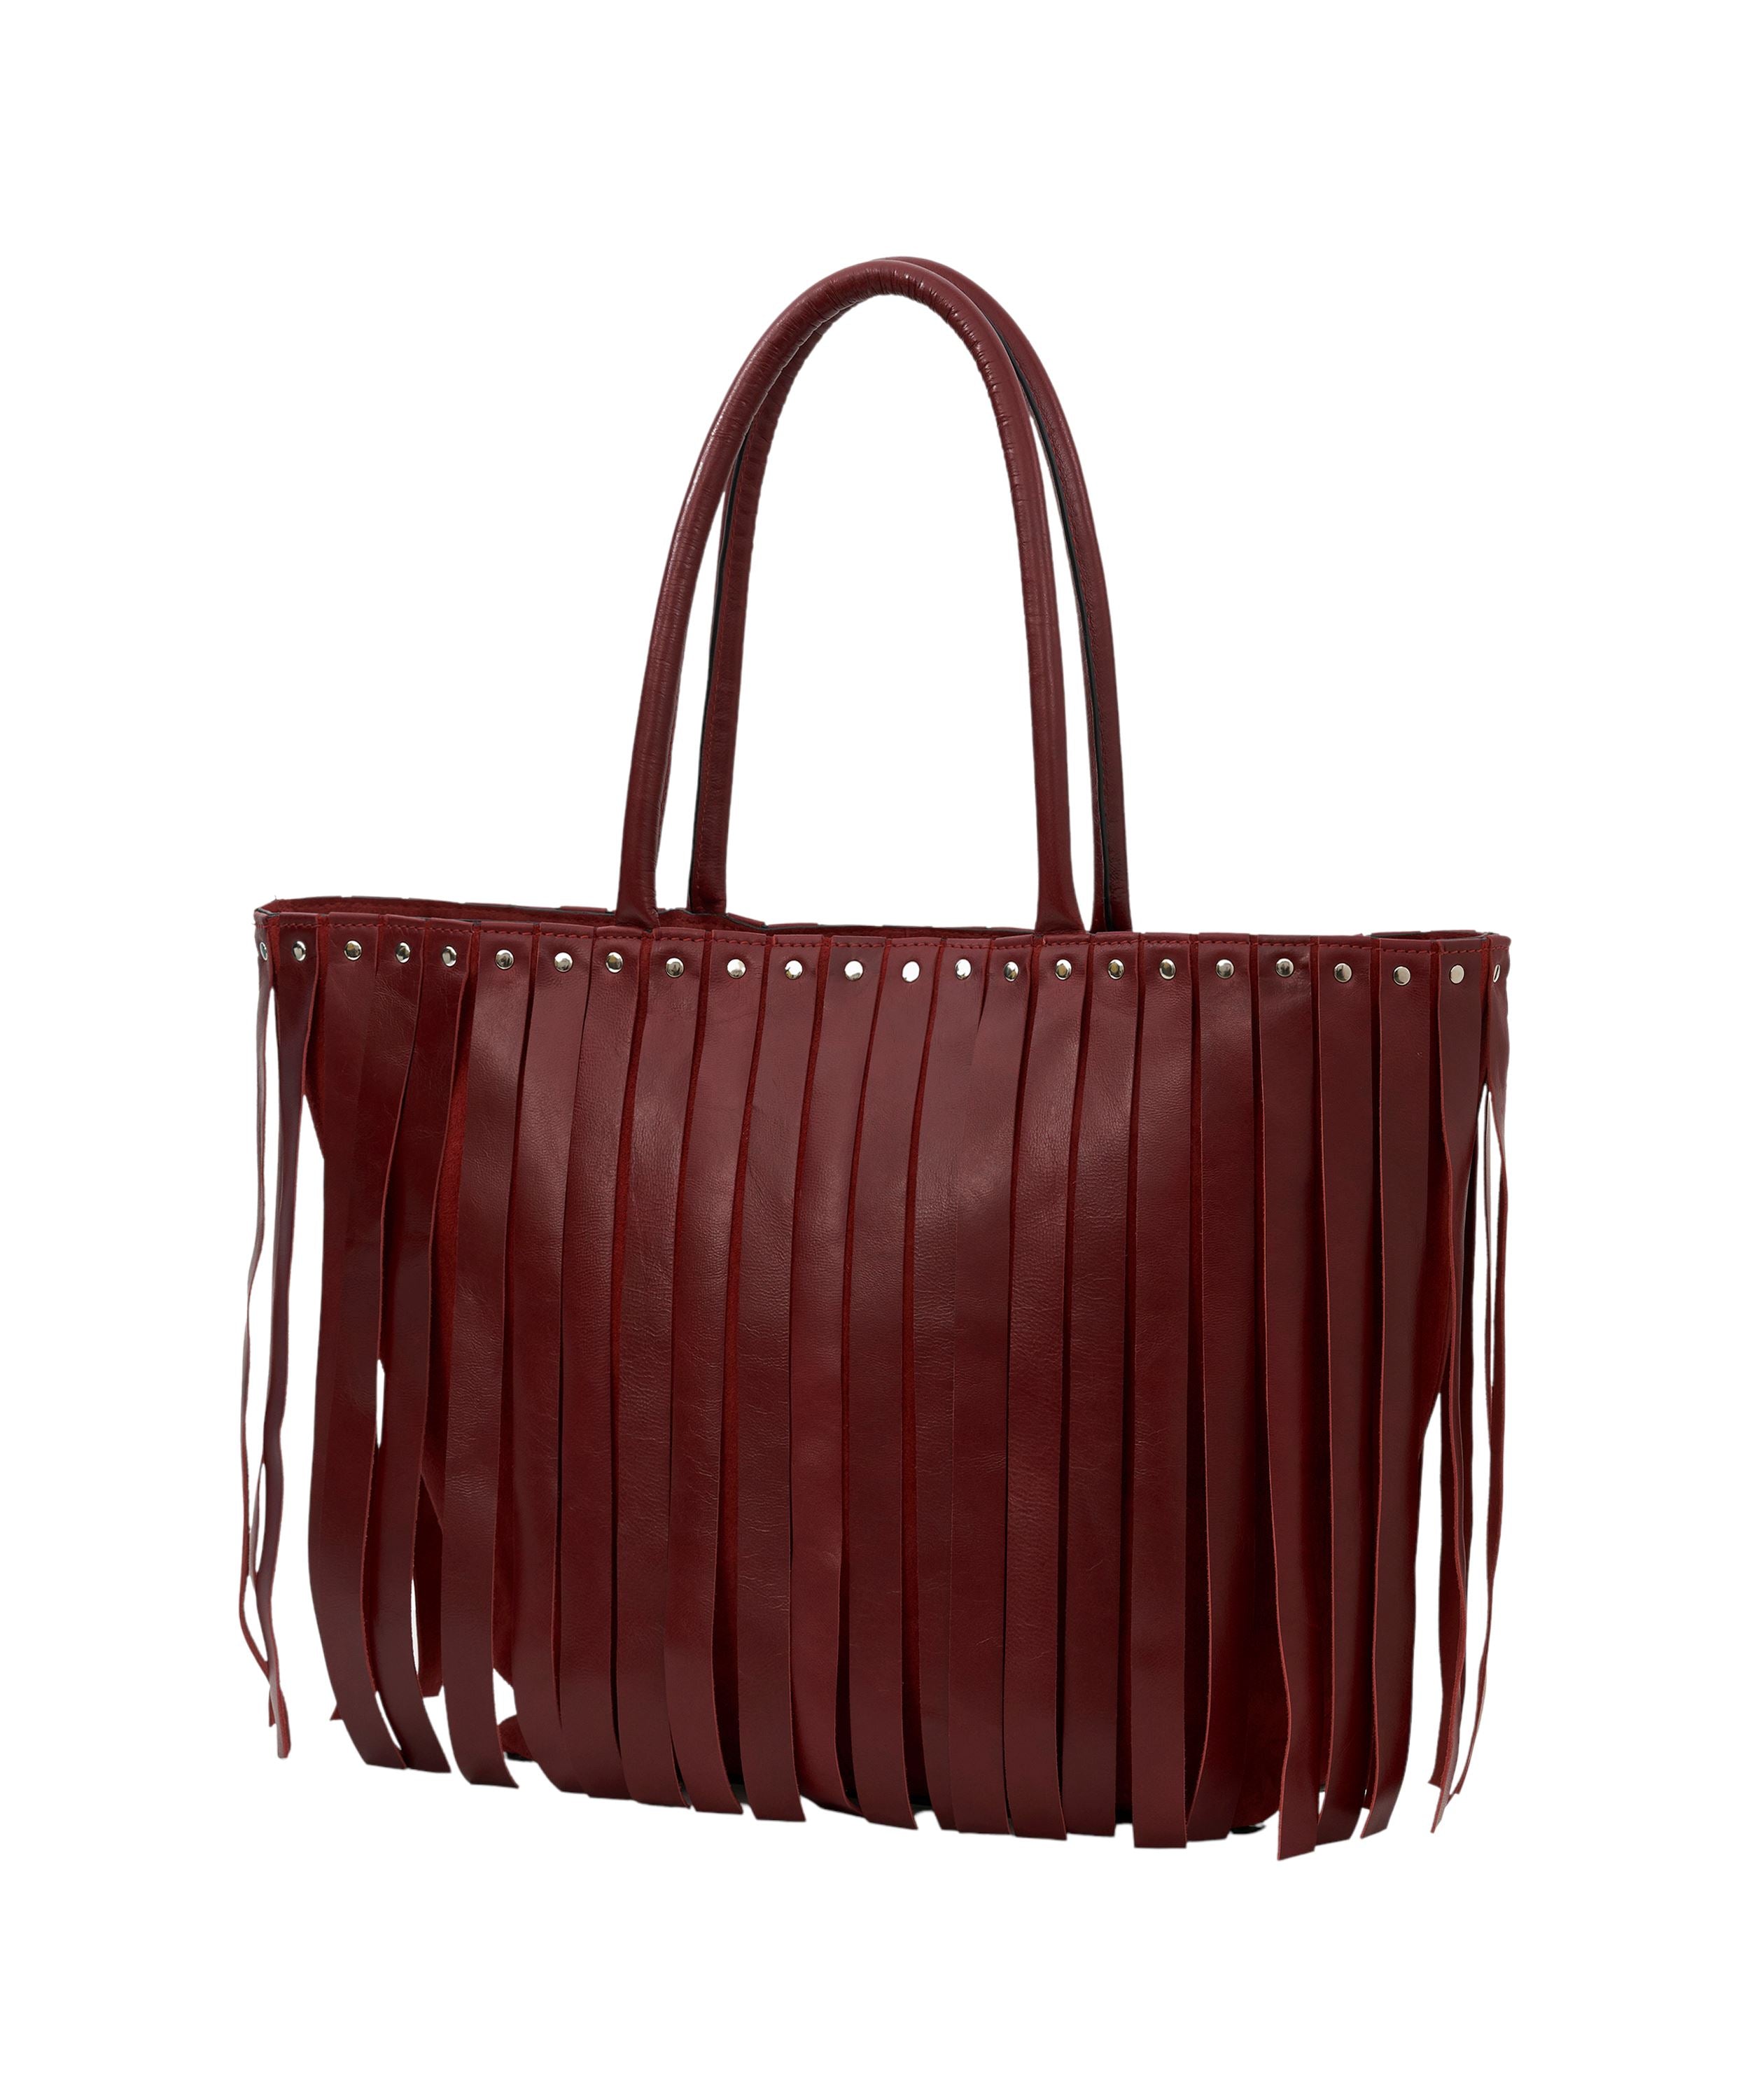 Tassel Tango Tote in Blood Red with Stud Details